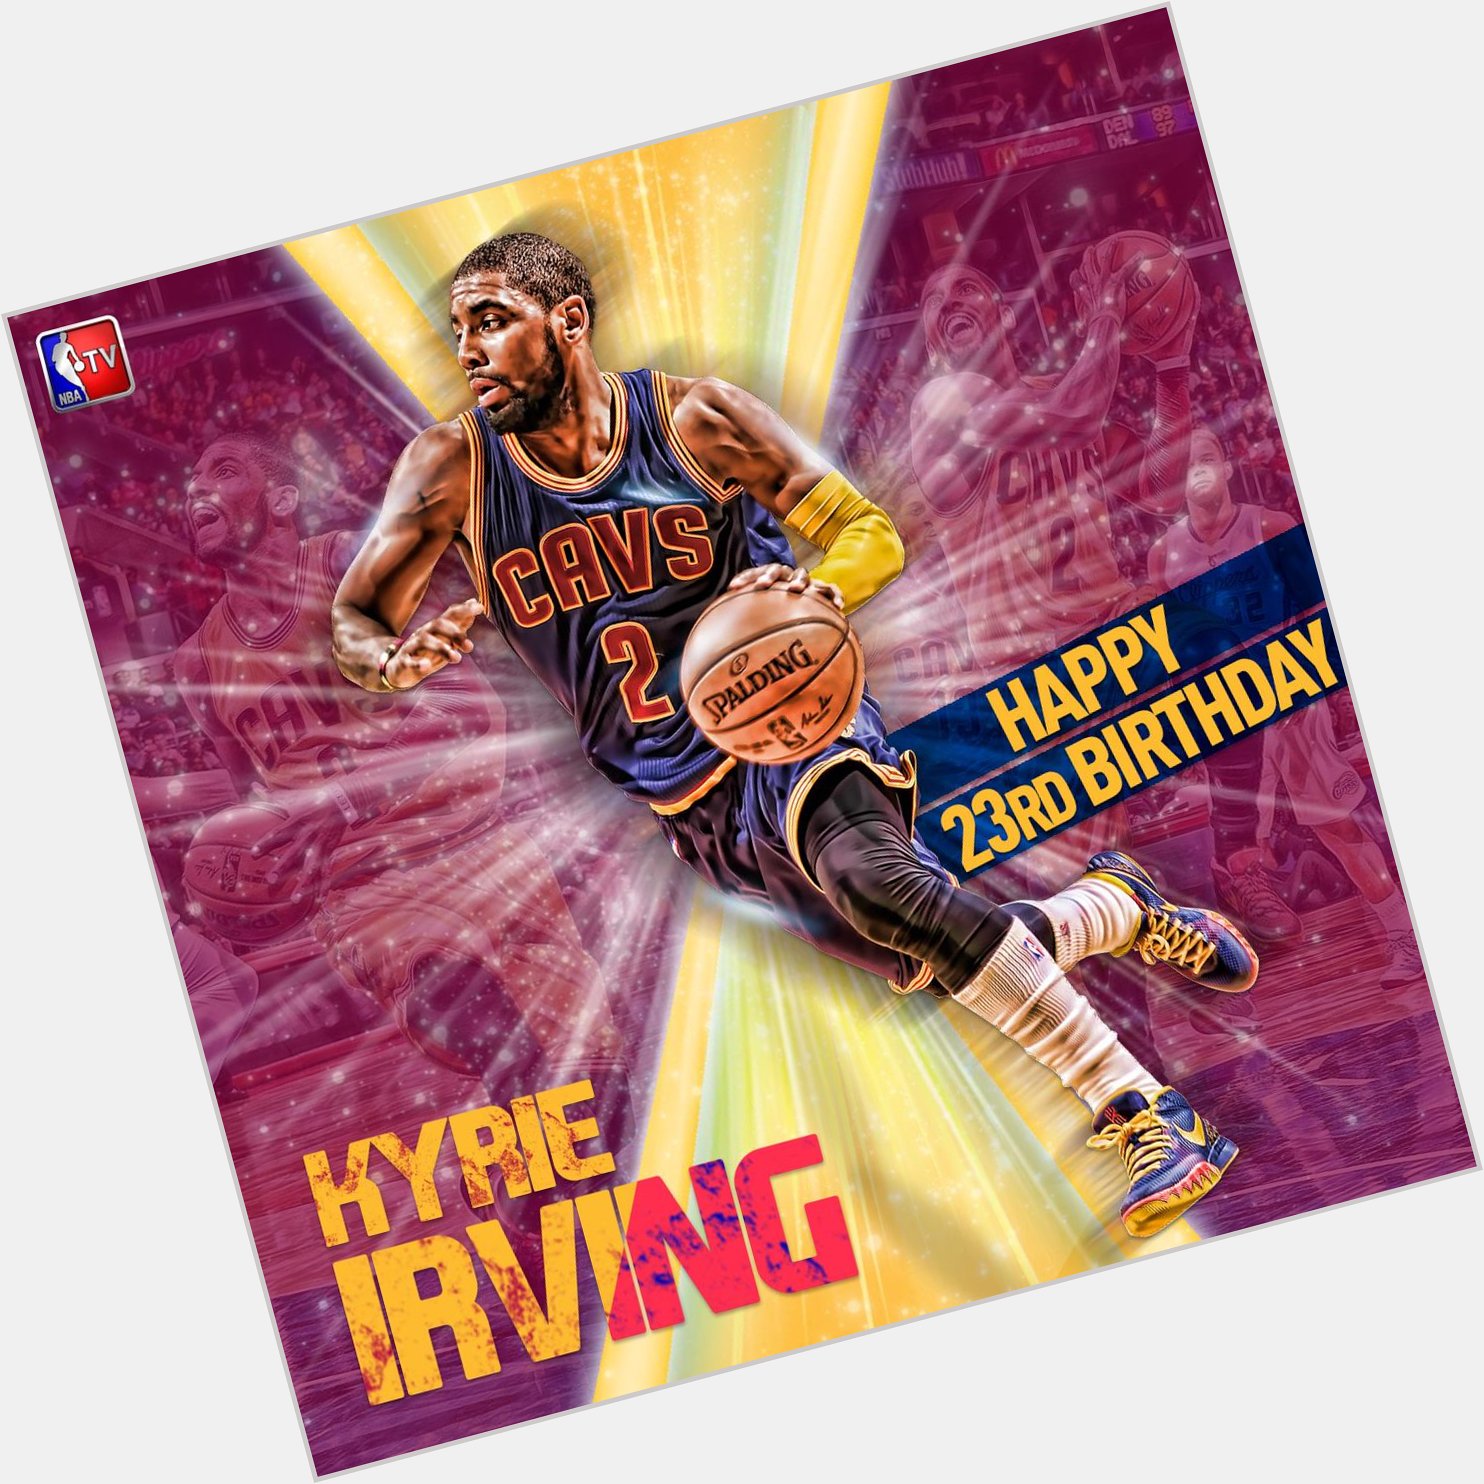   Happy Birthday Just was reminded that I am older than Kyrie Irving.  